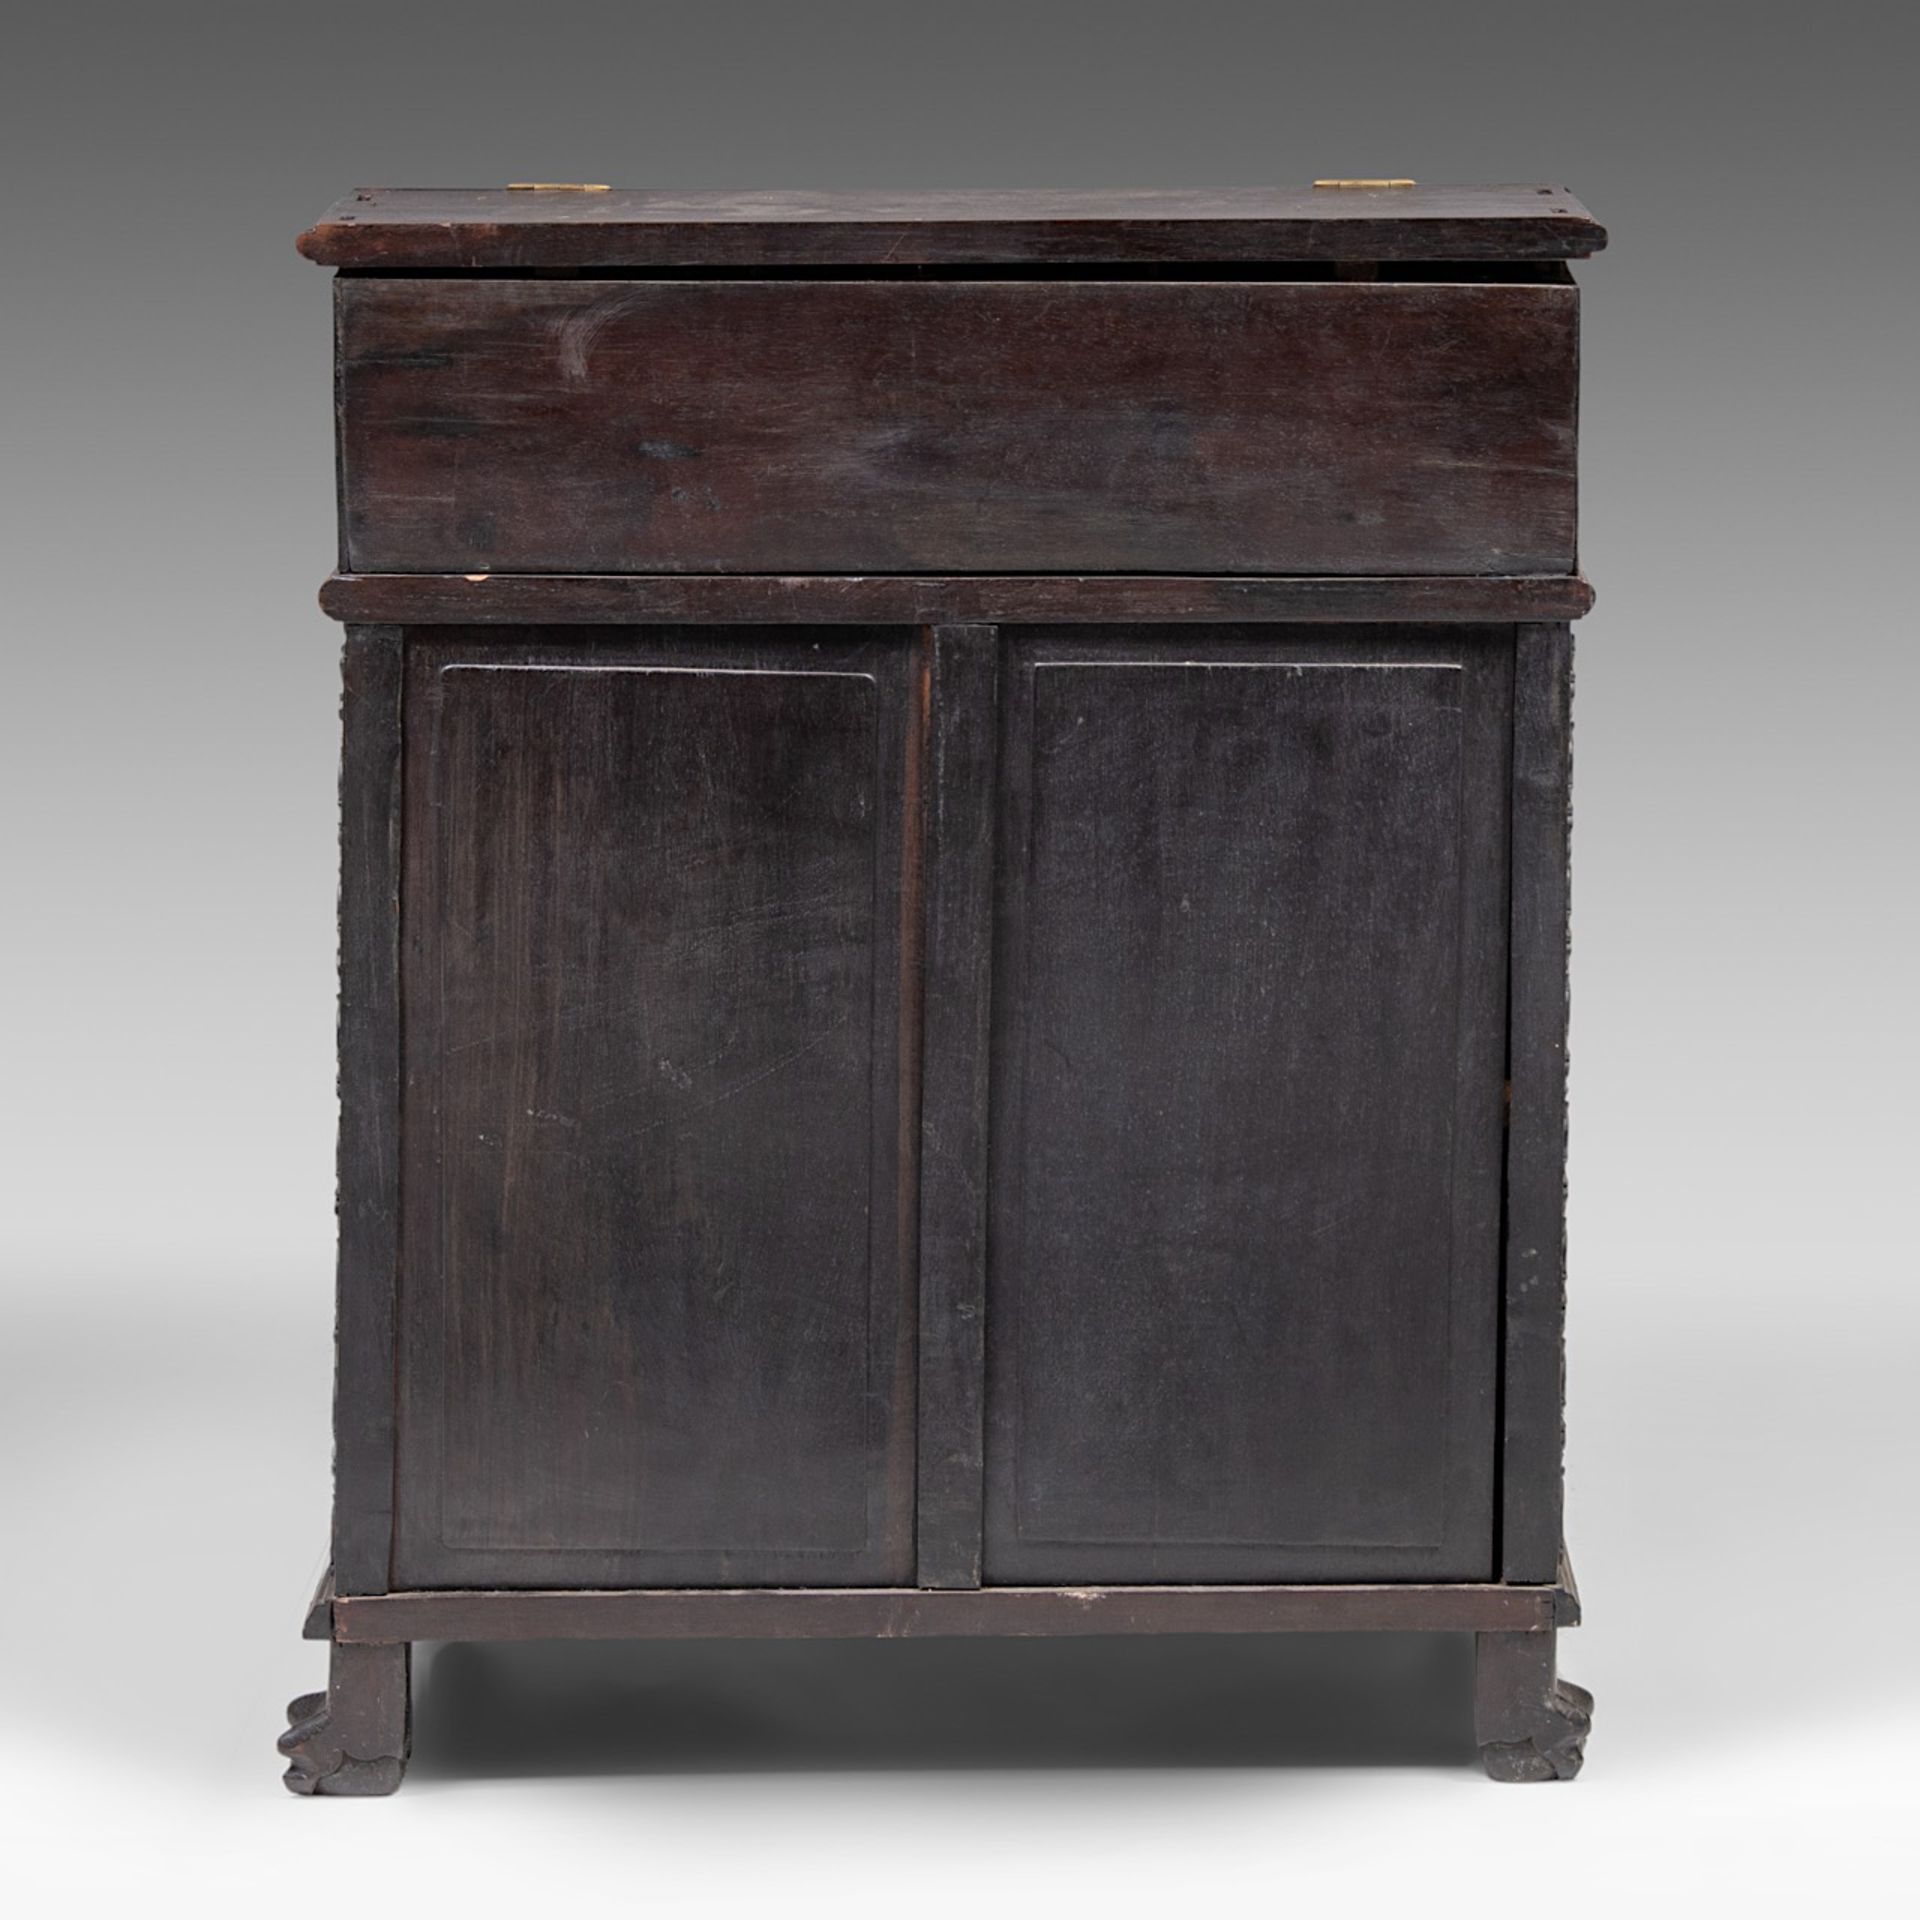 A compact South Chinese carved hardwood writing desk, 19thC, H 83 - W 66 - D 62 cm - Bild 5 aus 10